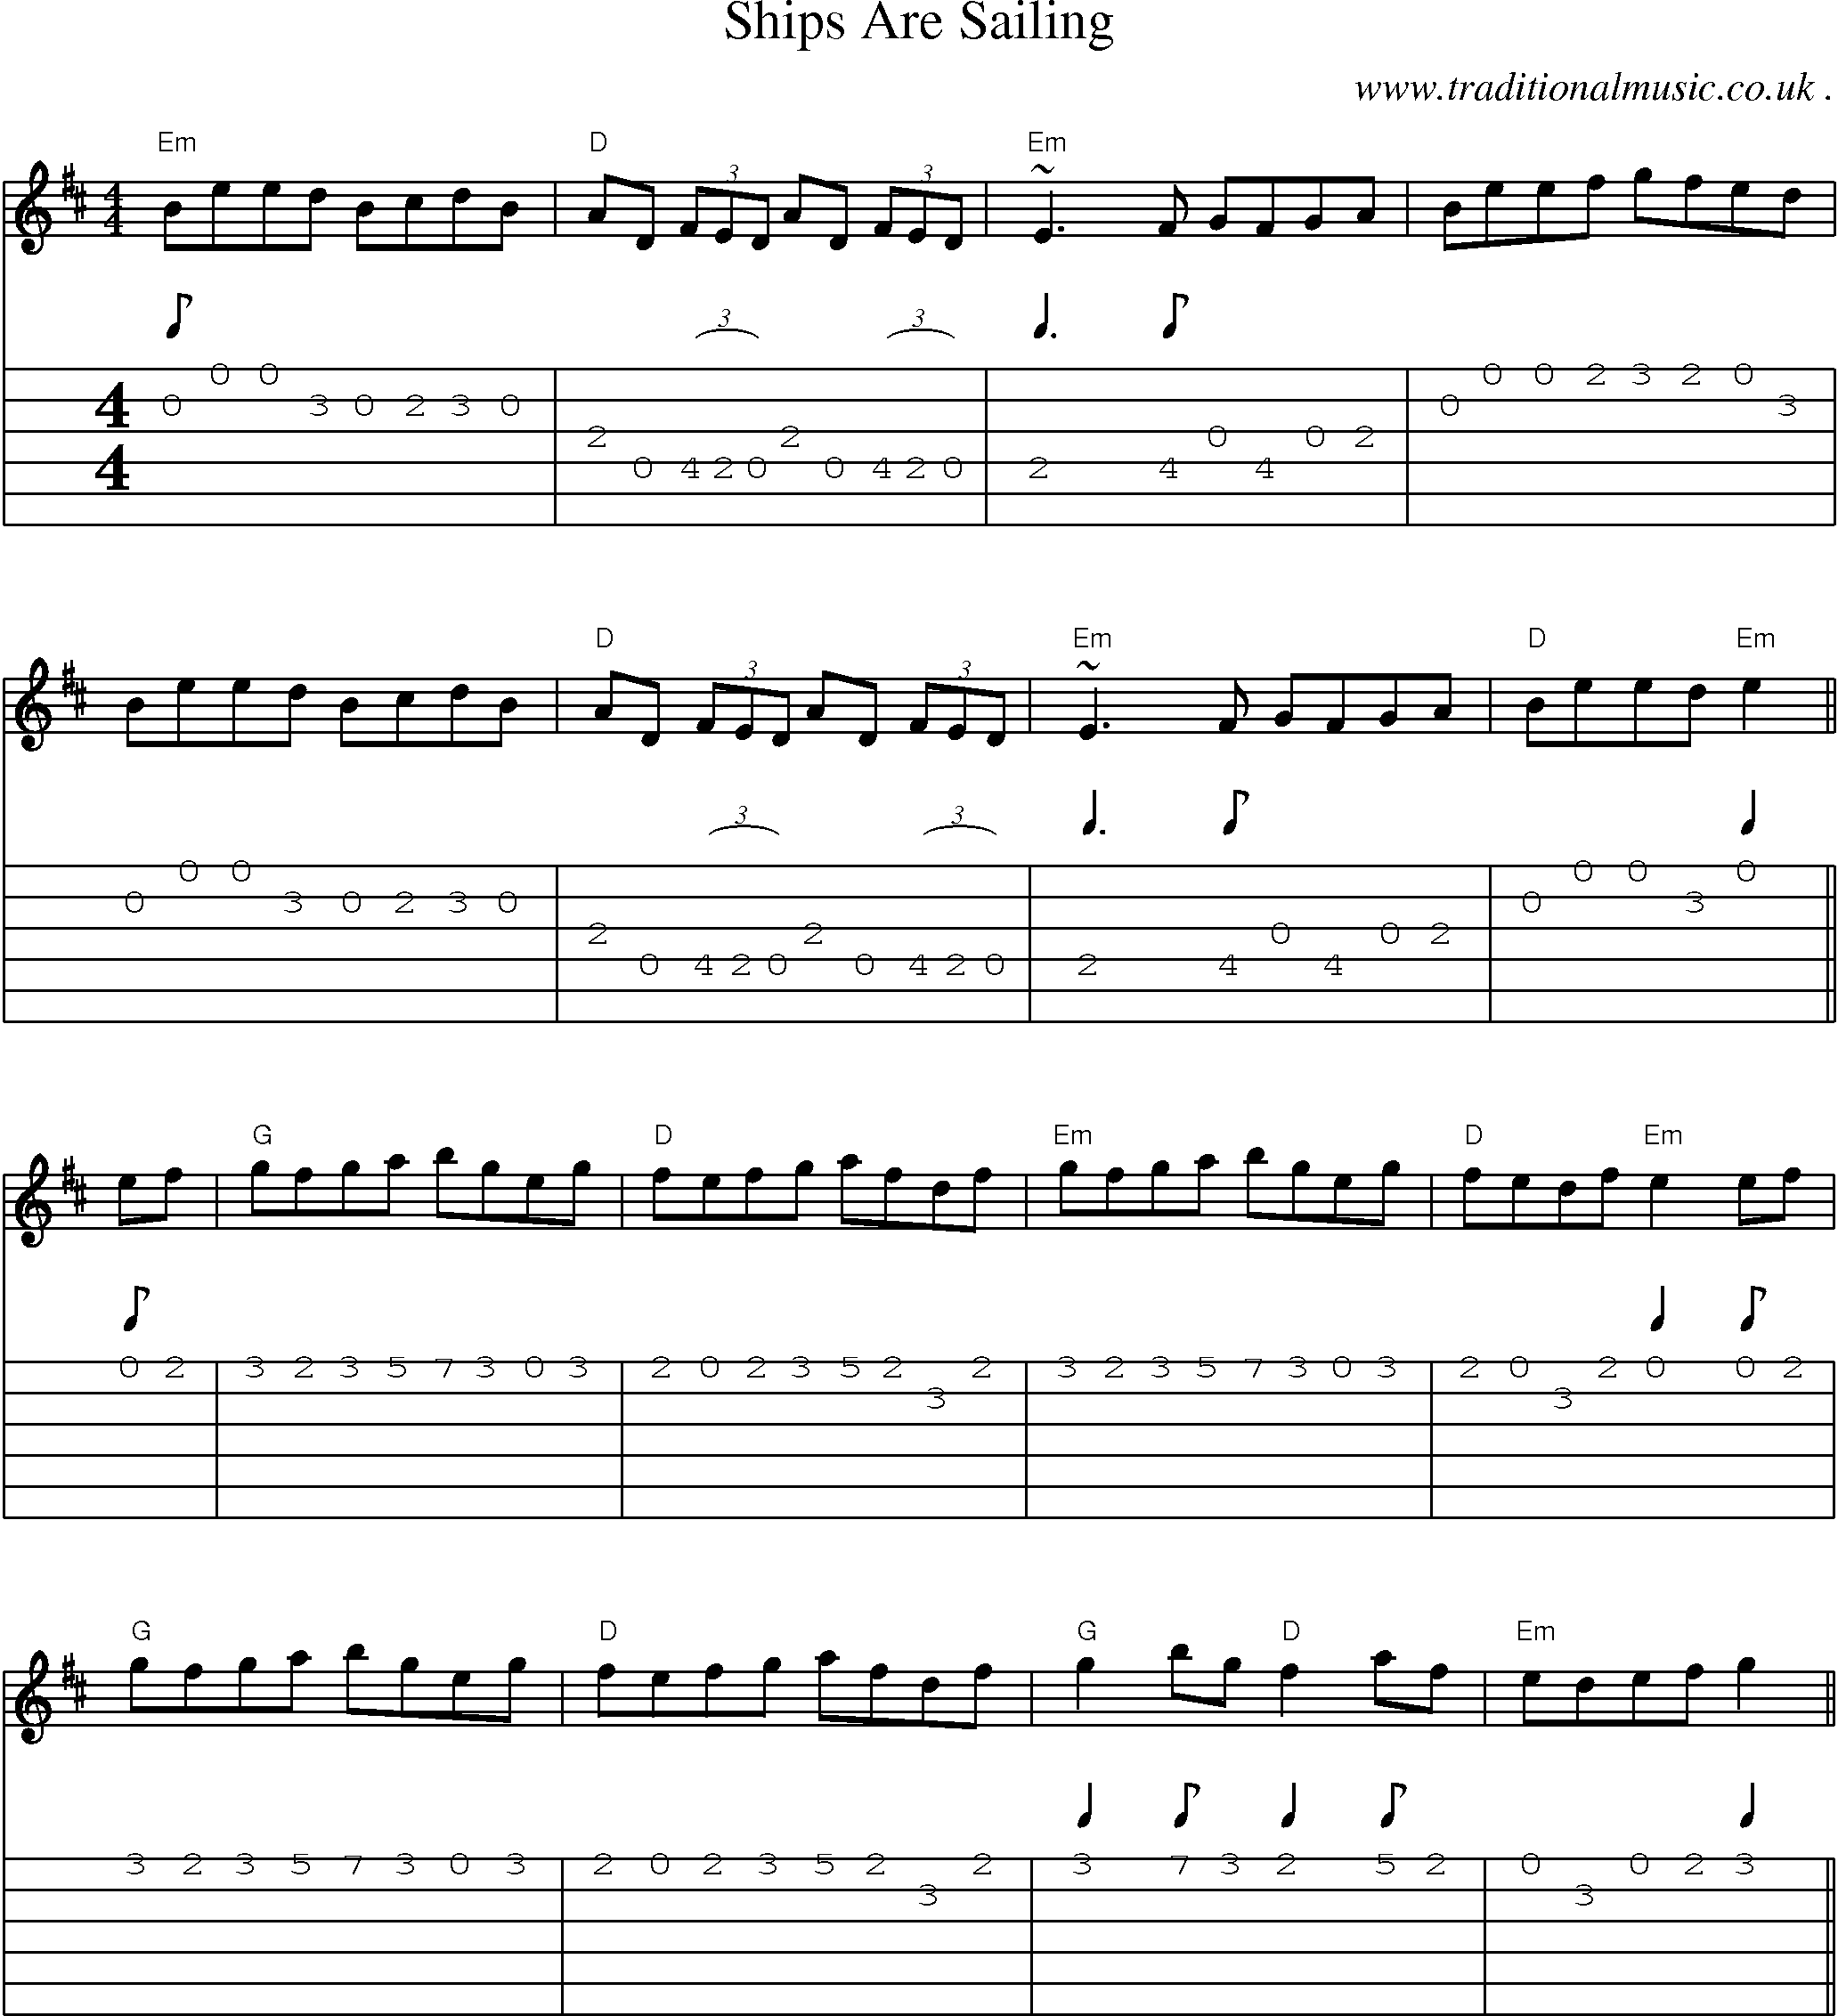 Music Score and Guitar Tabs for Ships Are Sailing